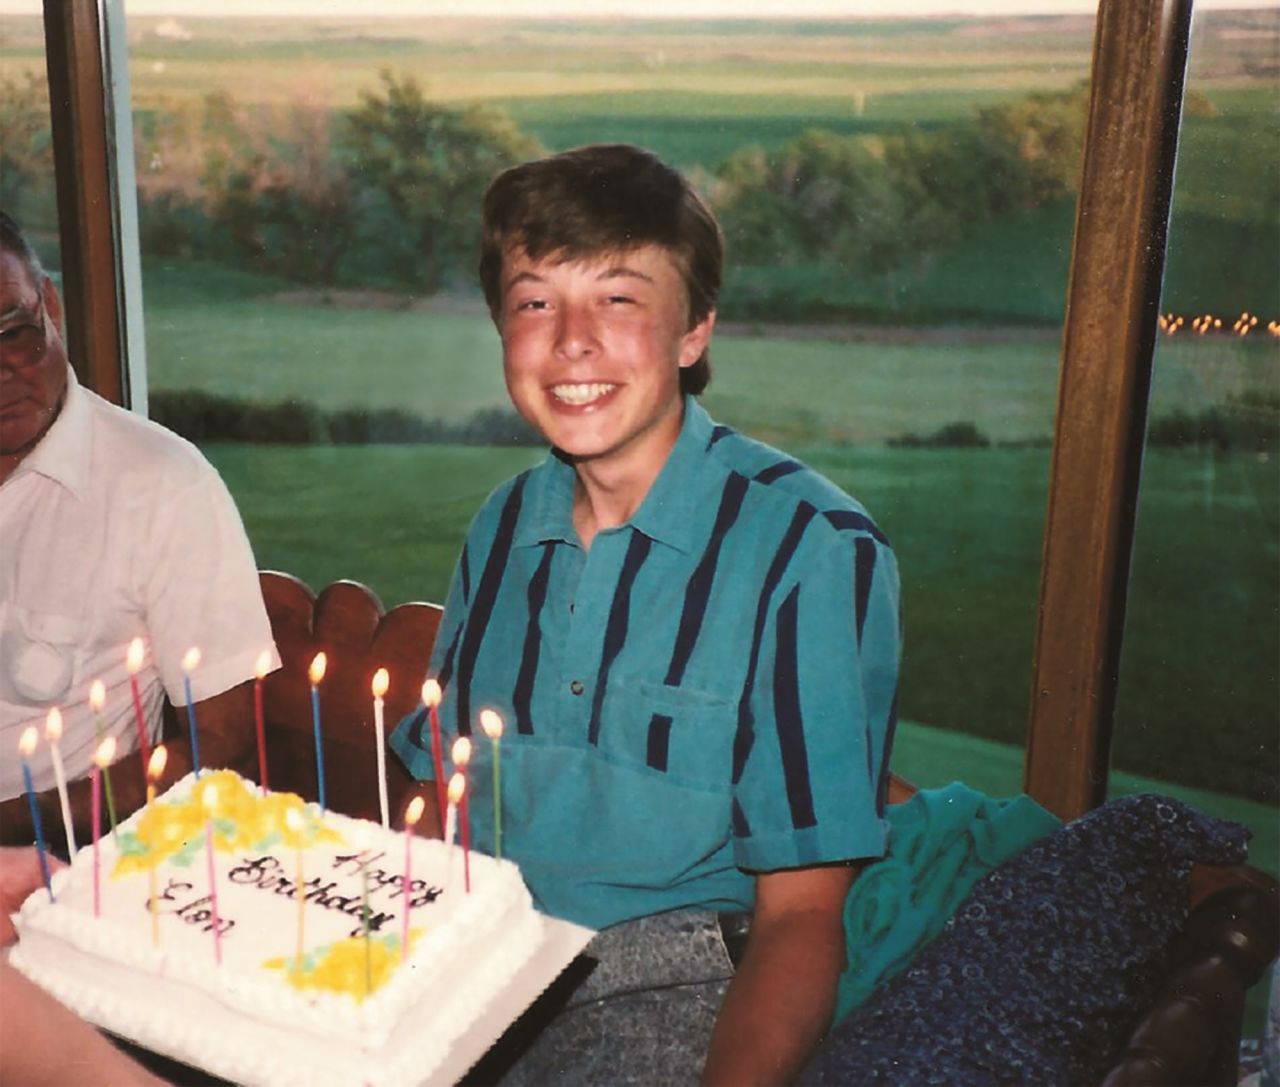 Musk celebrates his 18th birthday in 1989. He would leave South Africa for Canada, where he studied at Queen's University in Kingston, Ontario. In 1995, Musk graduated from the University of Pennsylvania with degrees in economics and physics.